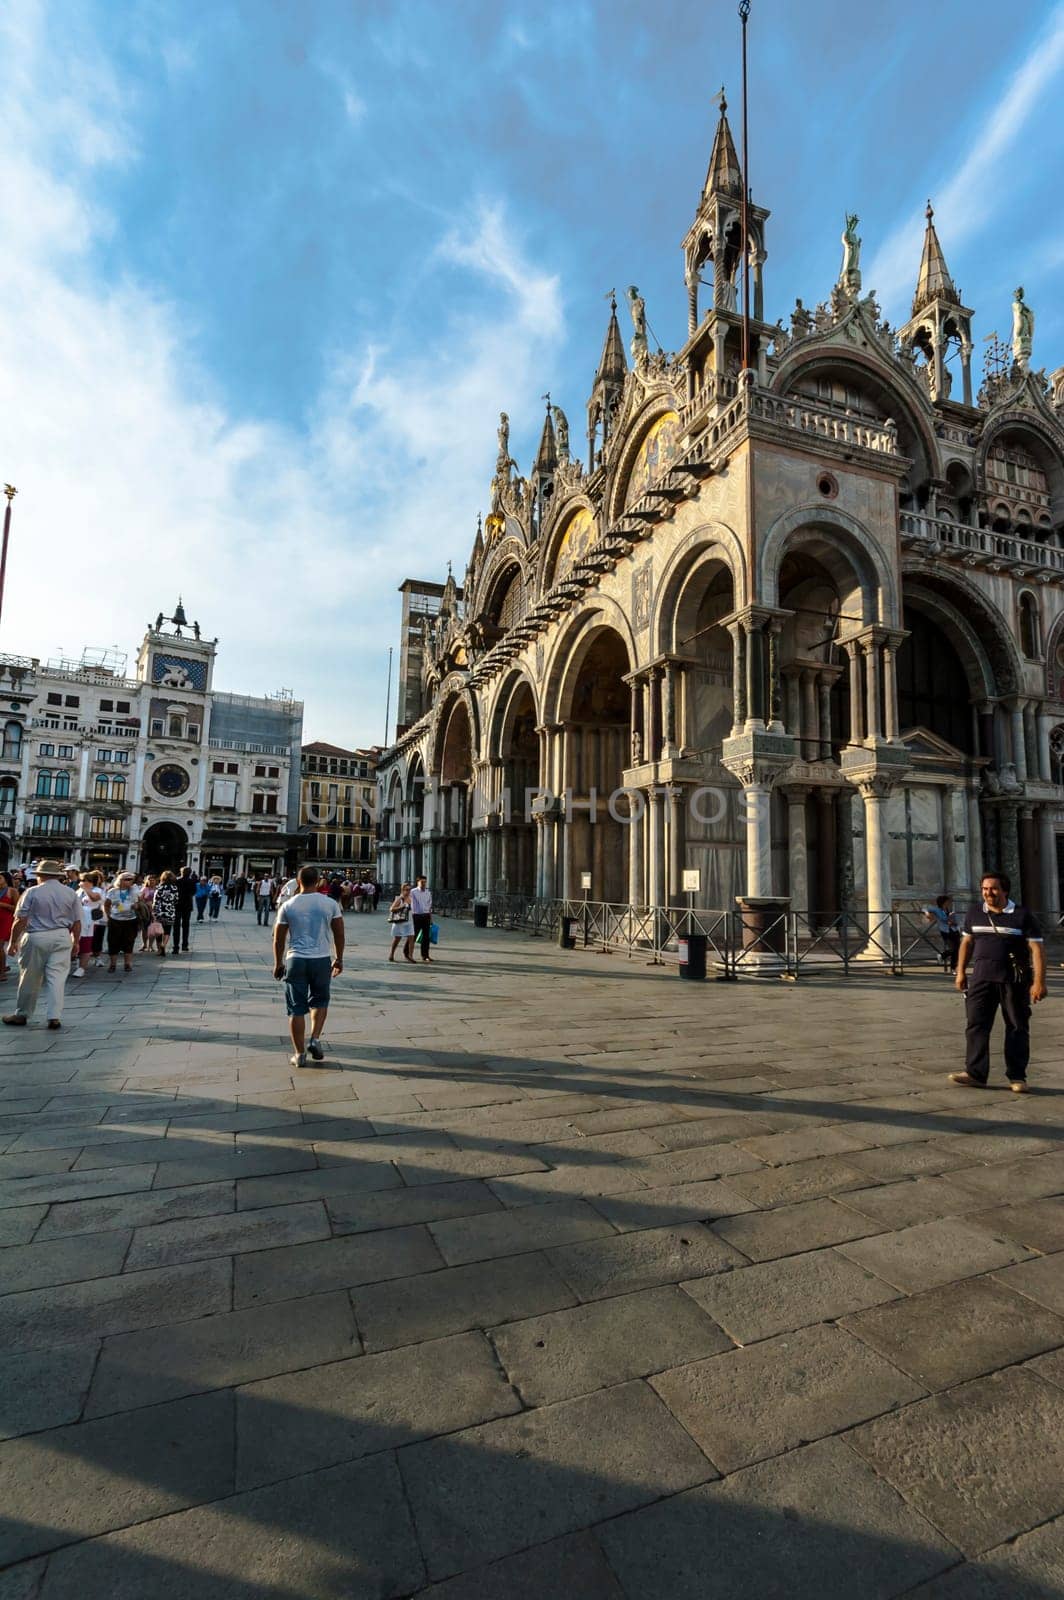 Tourists in San Marco square by Giamplume